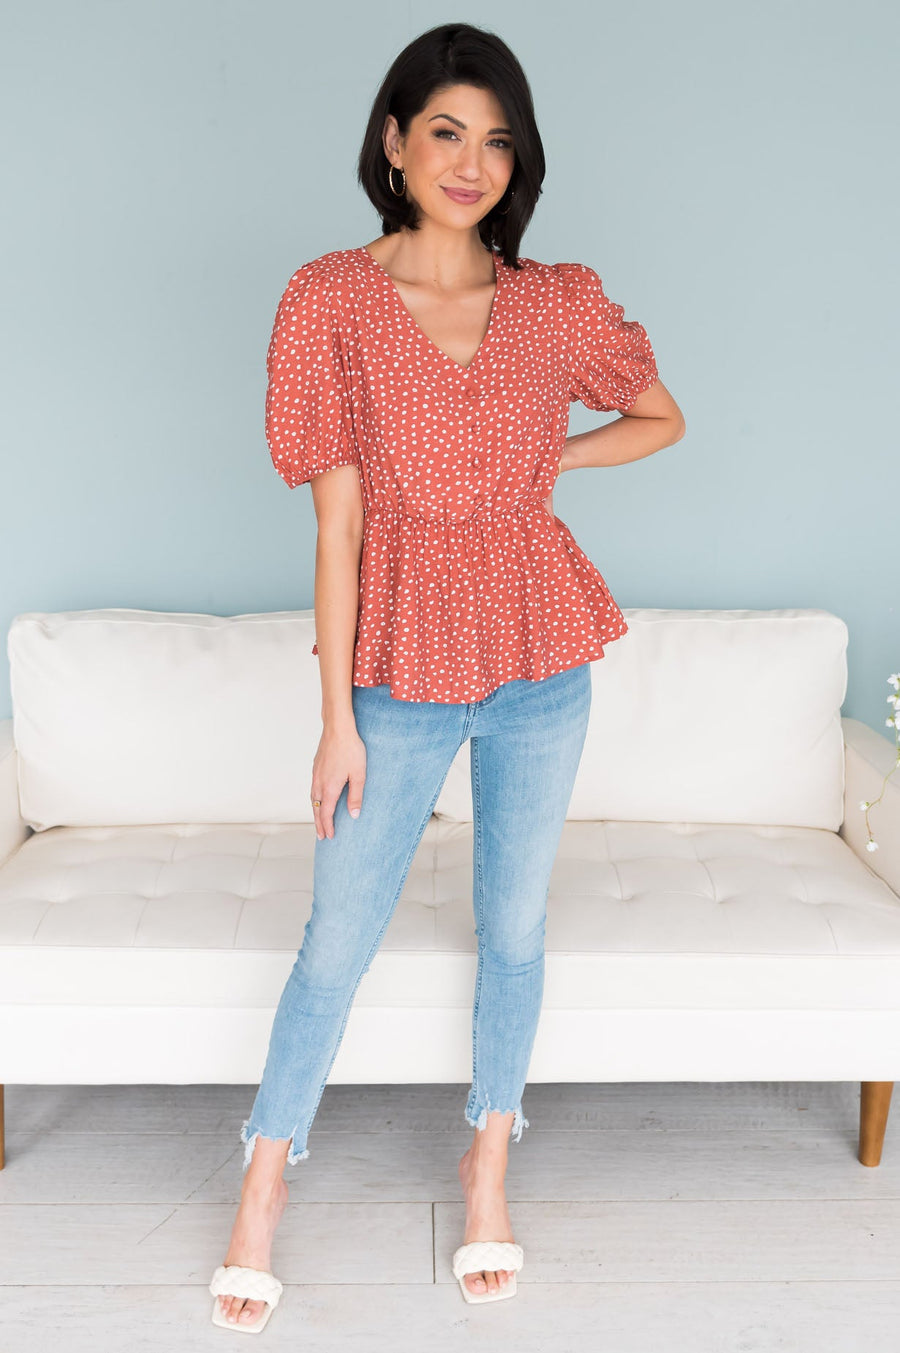 Cheer Found Me Modest Peplum Blouse Tops vendor-unknown 